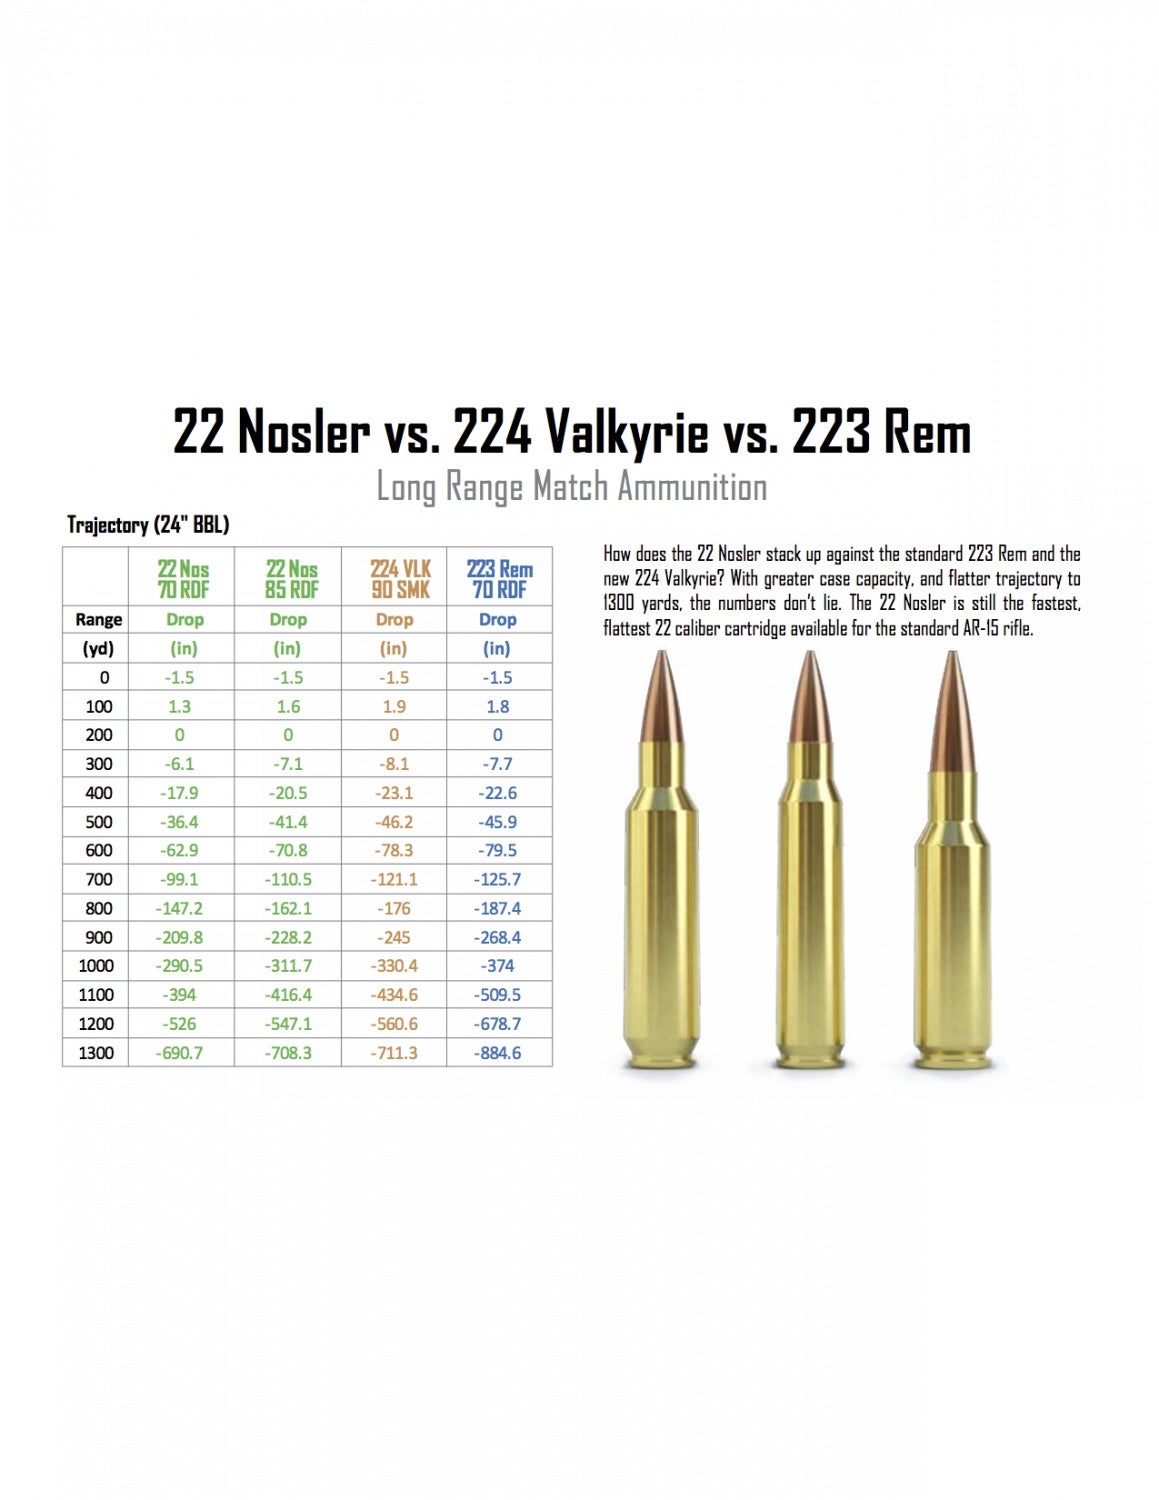 How does the 22 Nosler stack up against the standard 223 Rem and the new 22...